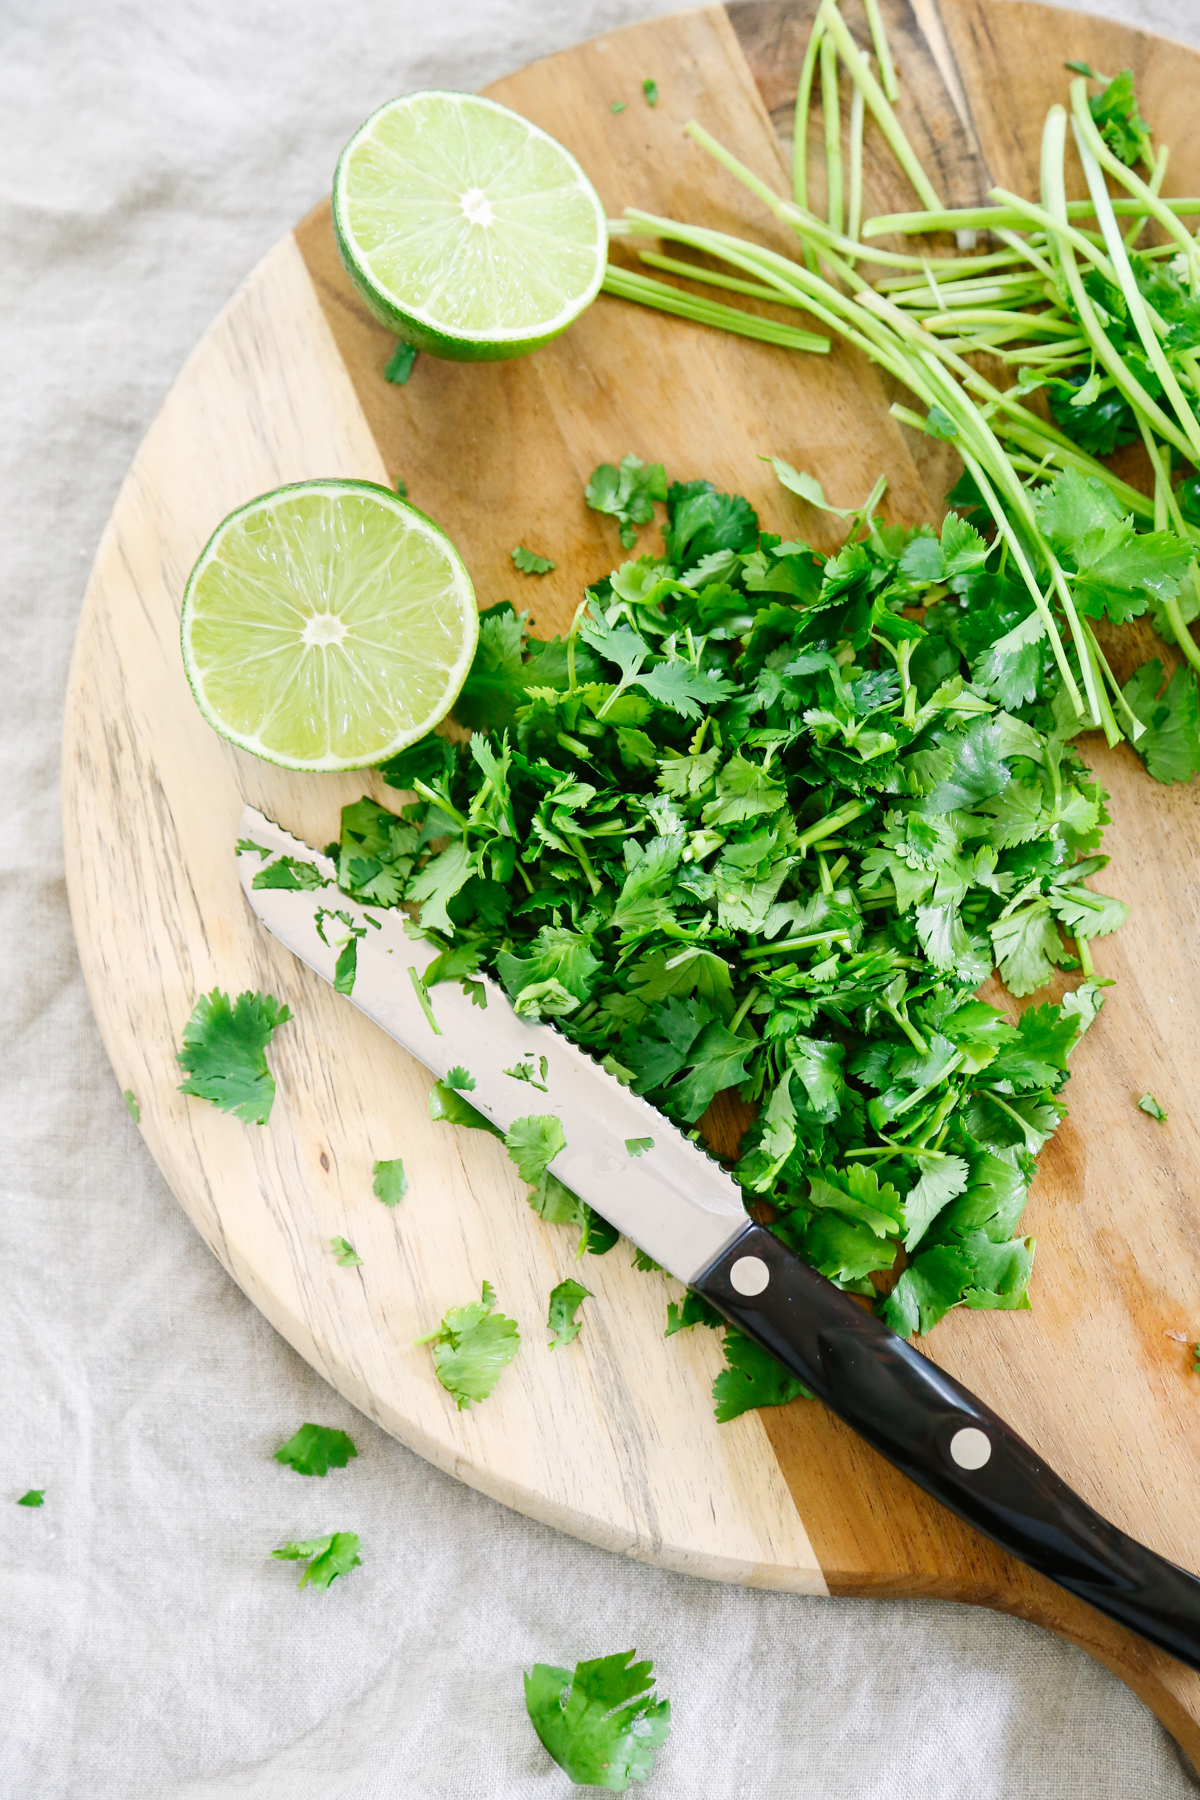 Chopped cilantro on a cutting board with a knife and halved lime.